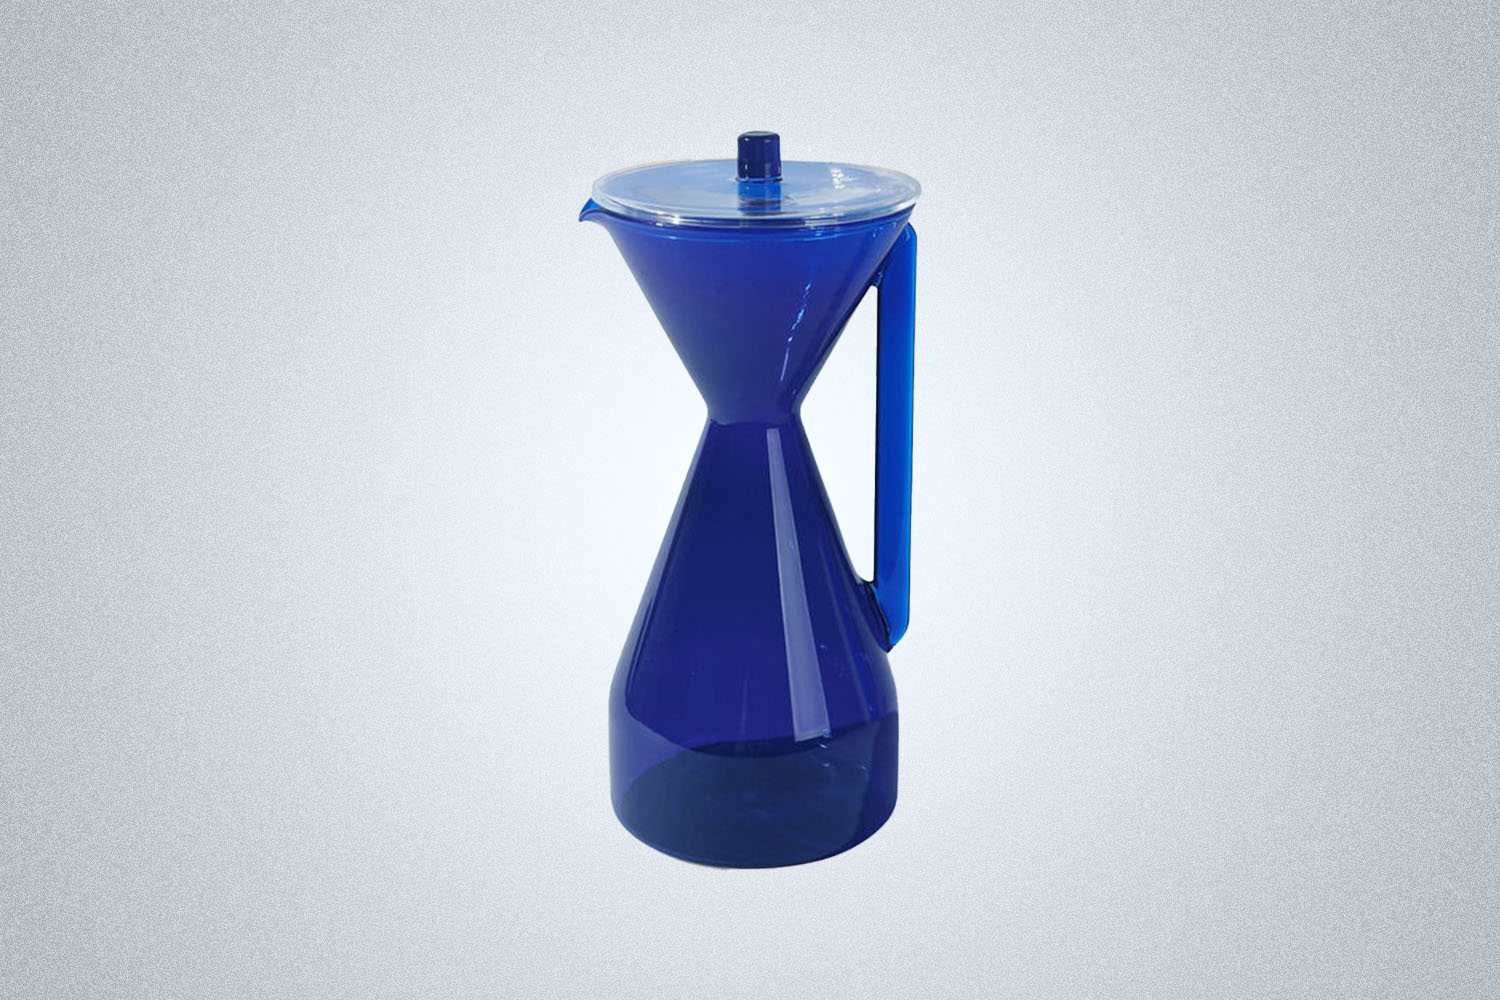 The Yield Pour-Over Glass Coffee Carafe in blue on a gray background